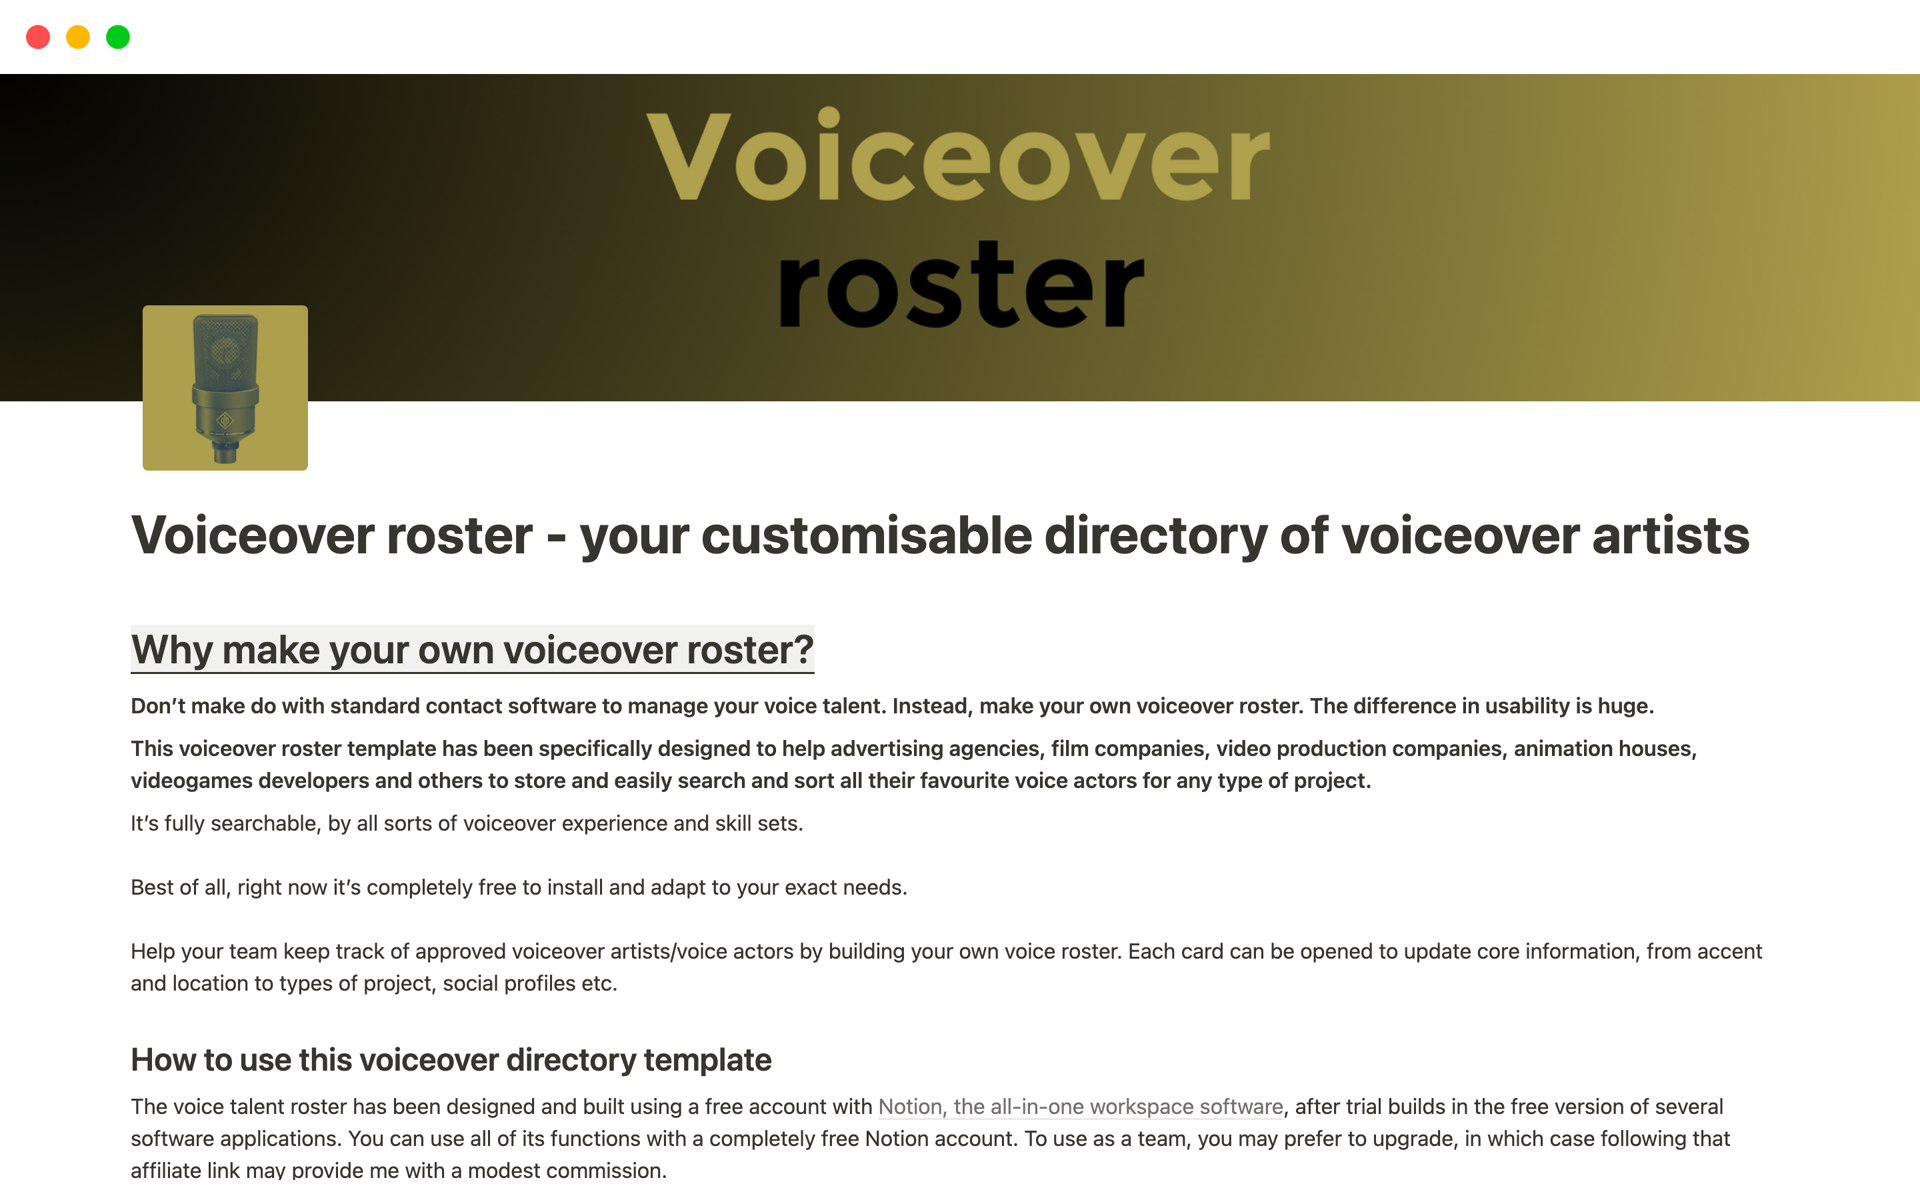 A ready-to-go voice talent directory you can scale and adapt to your company's needs